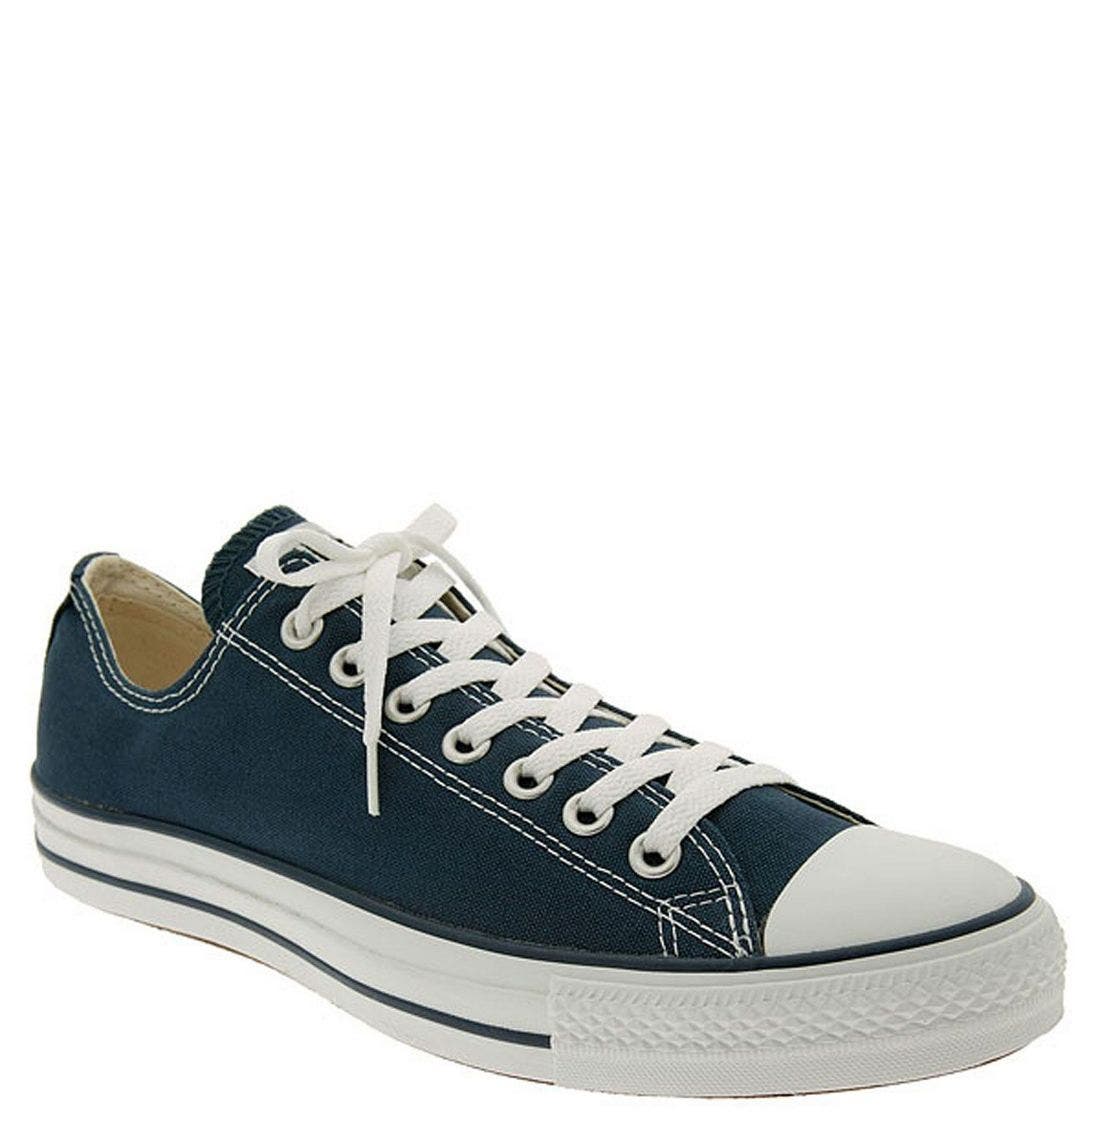 UPC 022859567053 product image for Converse Chuck Taylor All Star Low Sneaker, Size 10 M - Blue | upcitemdb.com